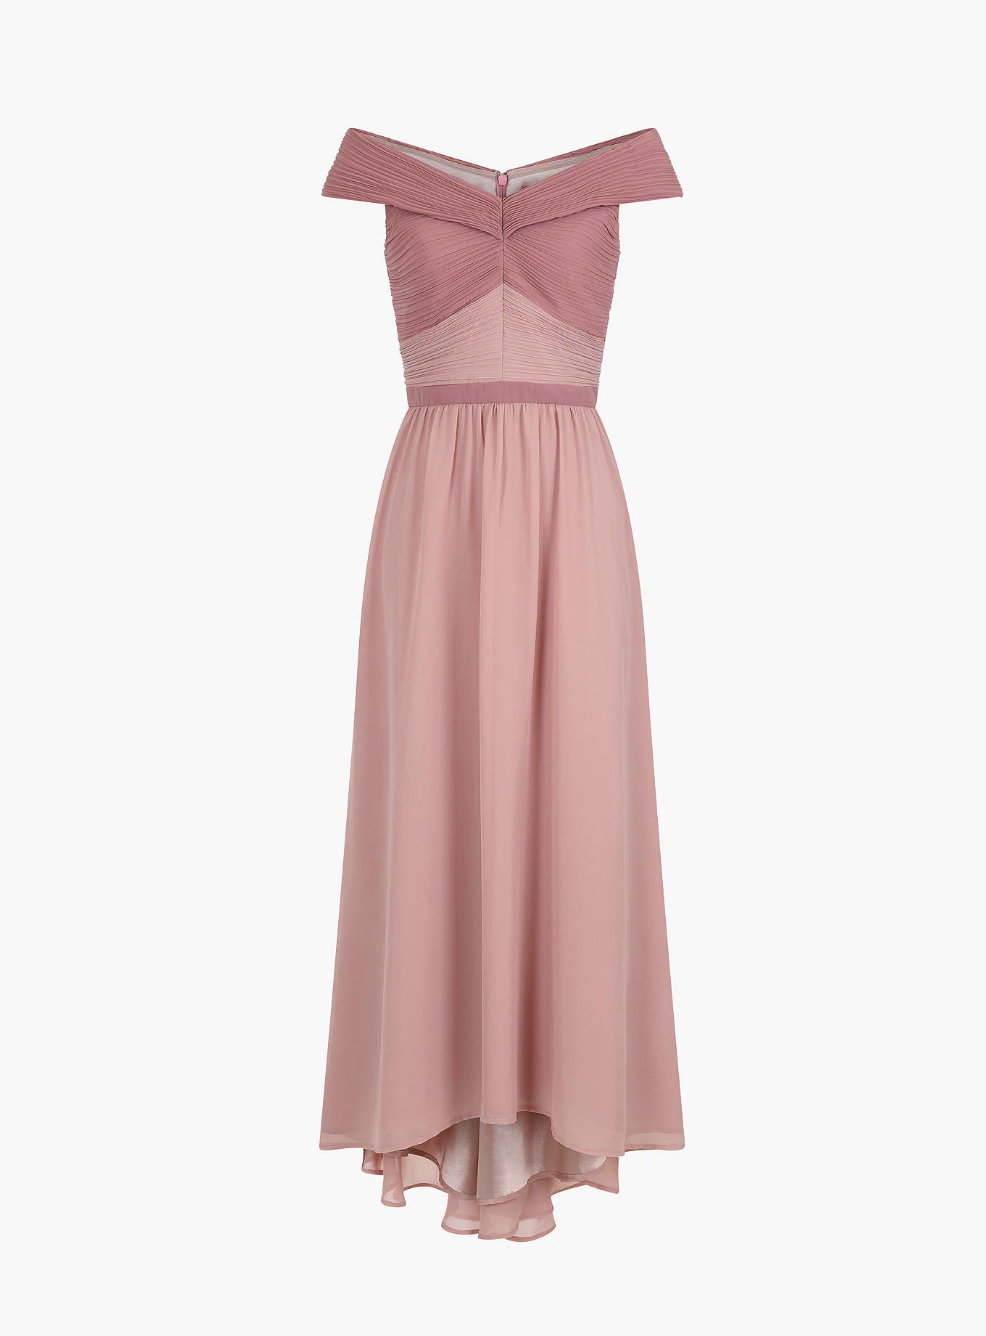 gucci pink gown